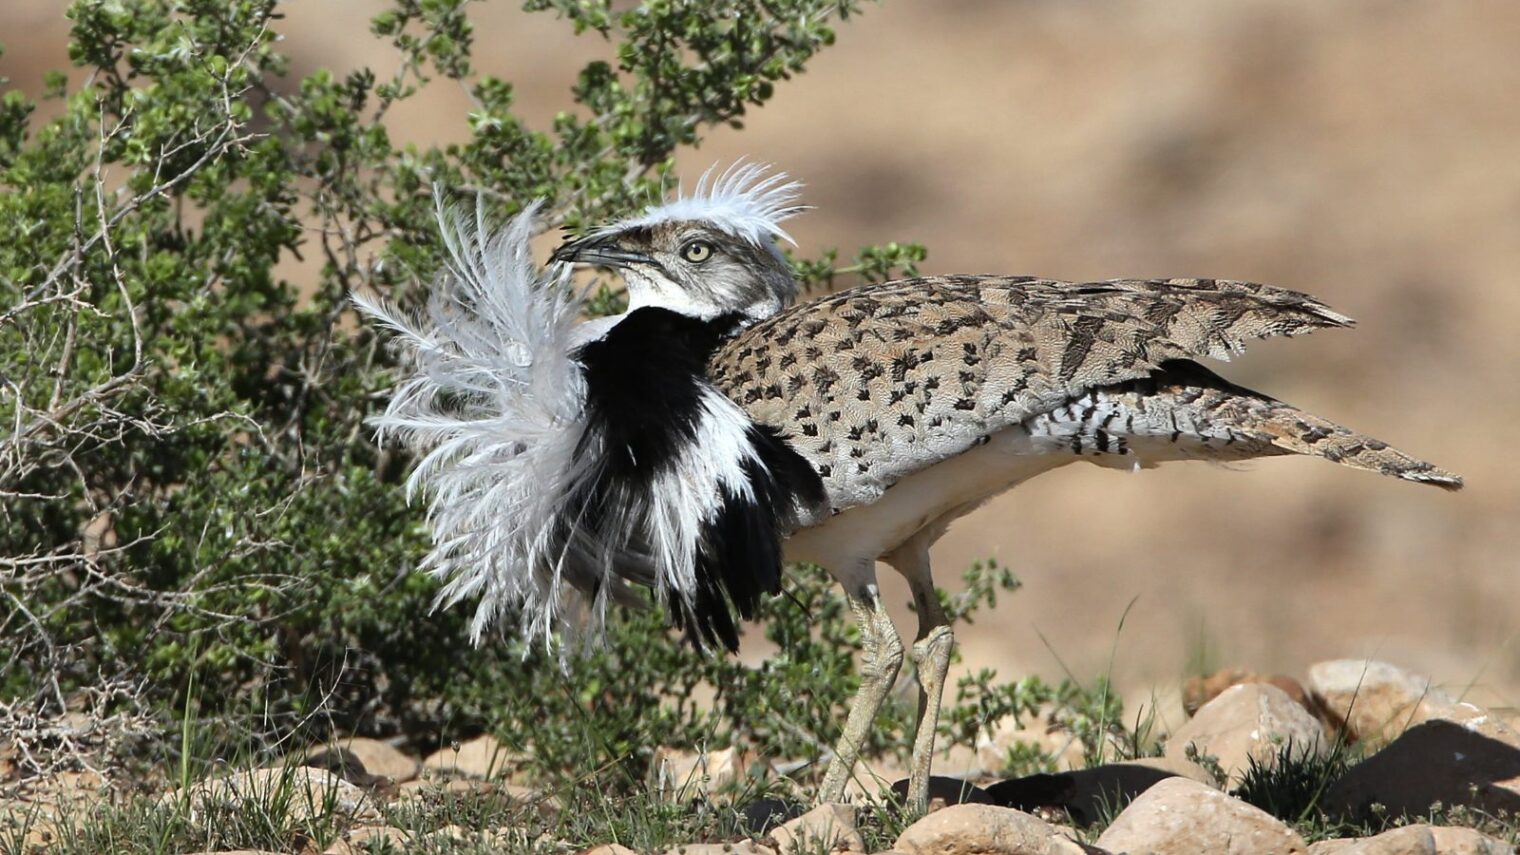 There are only 400 houbara bustards in Israel, but their small numbers don’t diminish their importance. Photo by Dr. Haim Shohat/Flash90